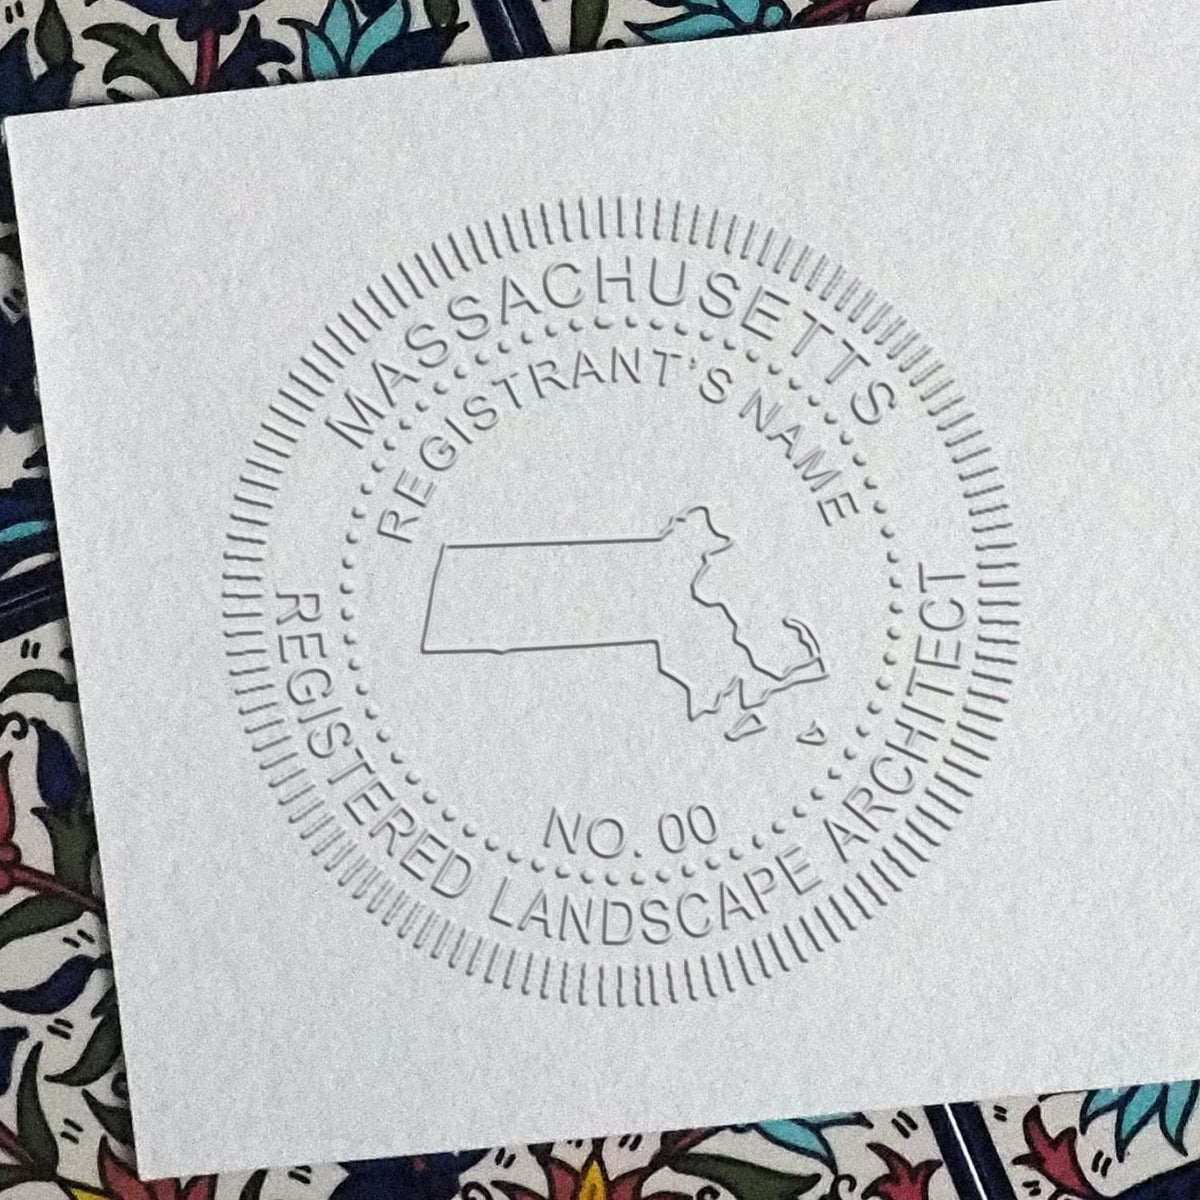 An in use photo of the Hybrid Massachusetts Landscape Architect Seal showing a sample imprint on a cardstock